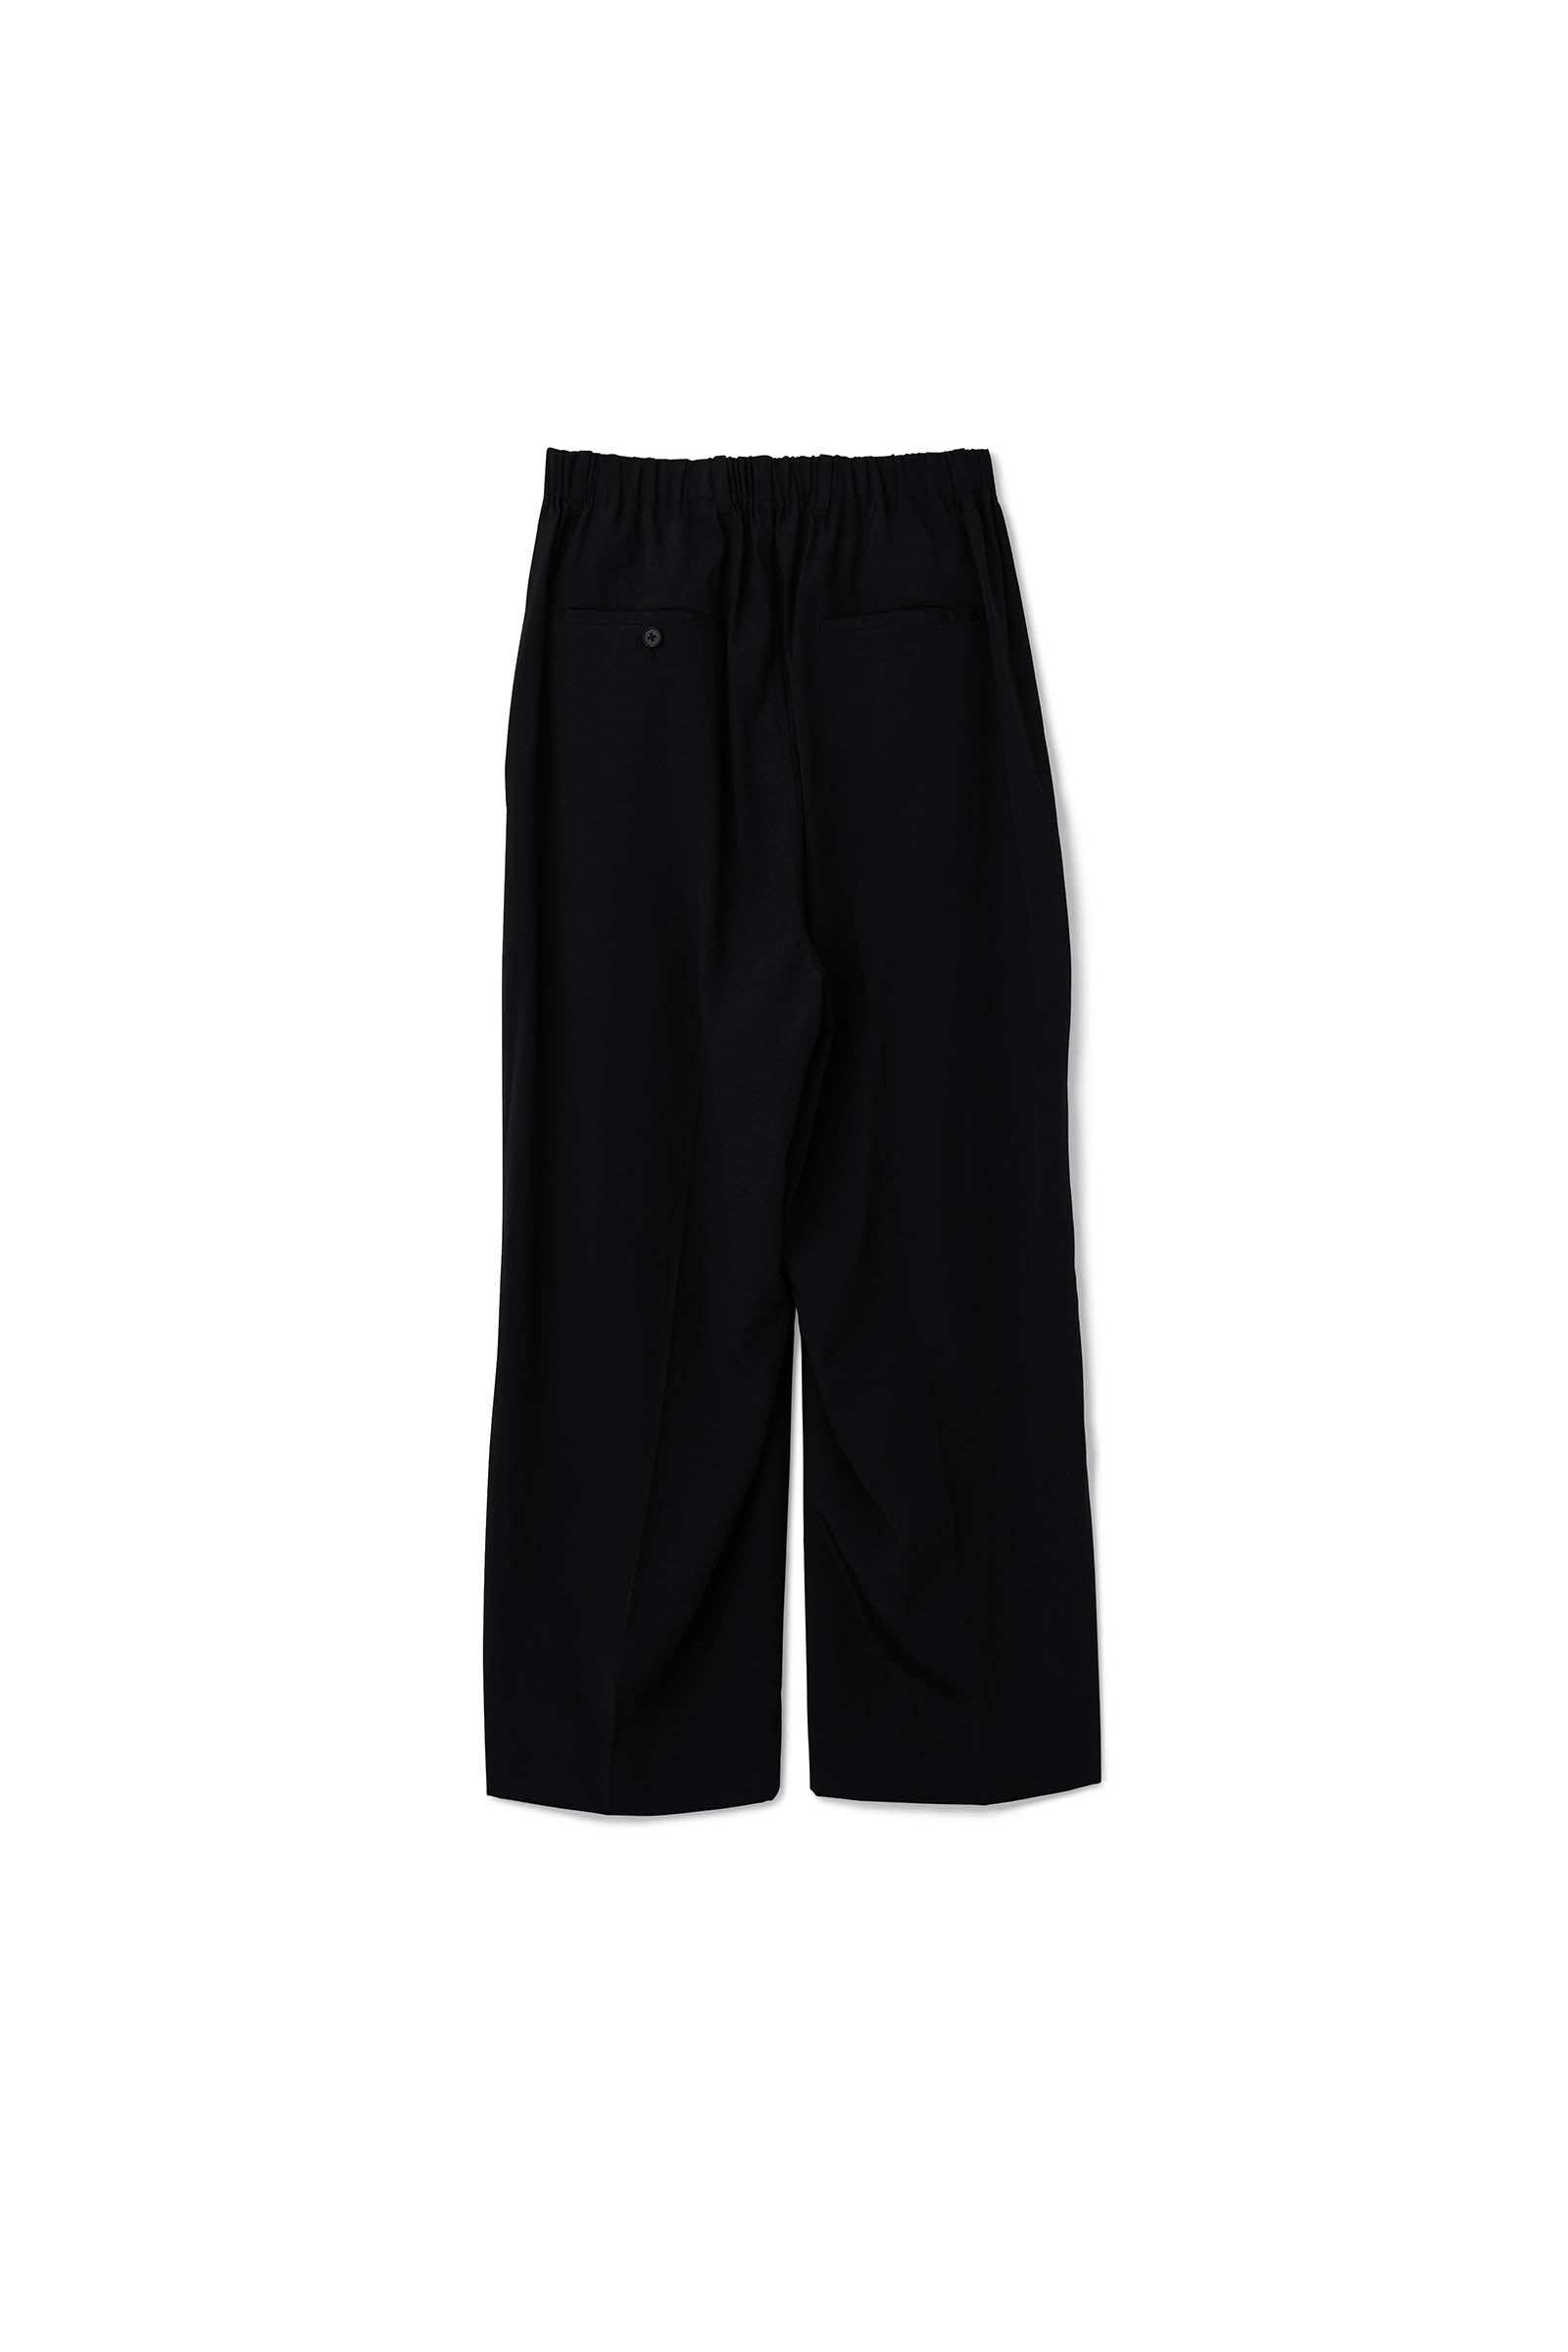 nonnotte / Draping Elastic Wide Trousers Type A